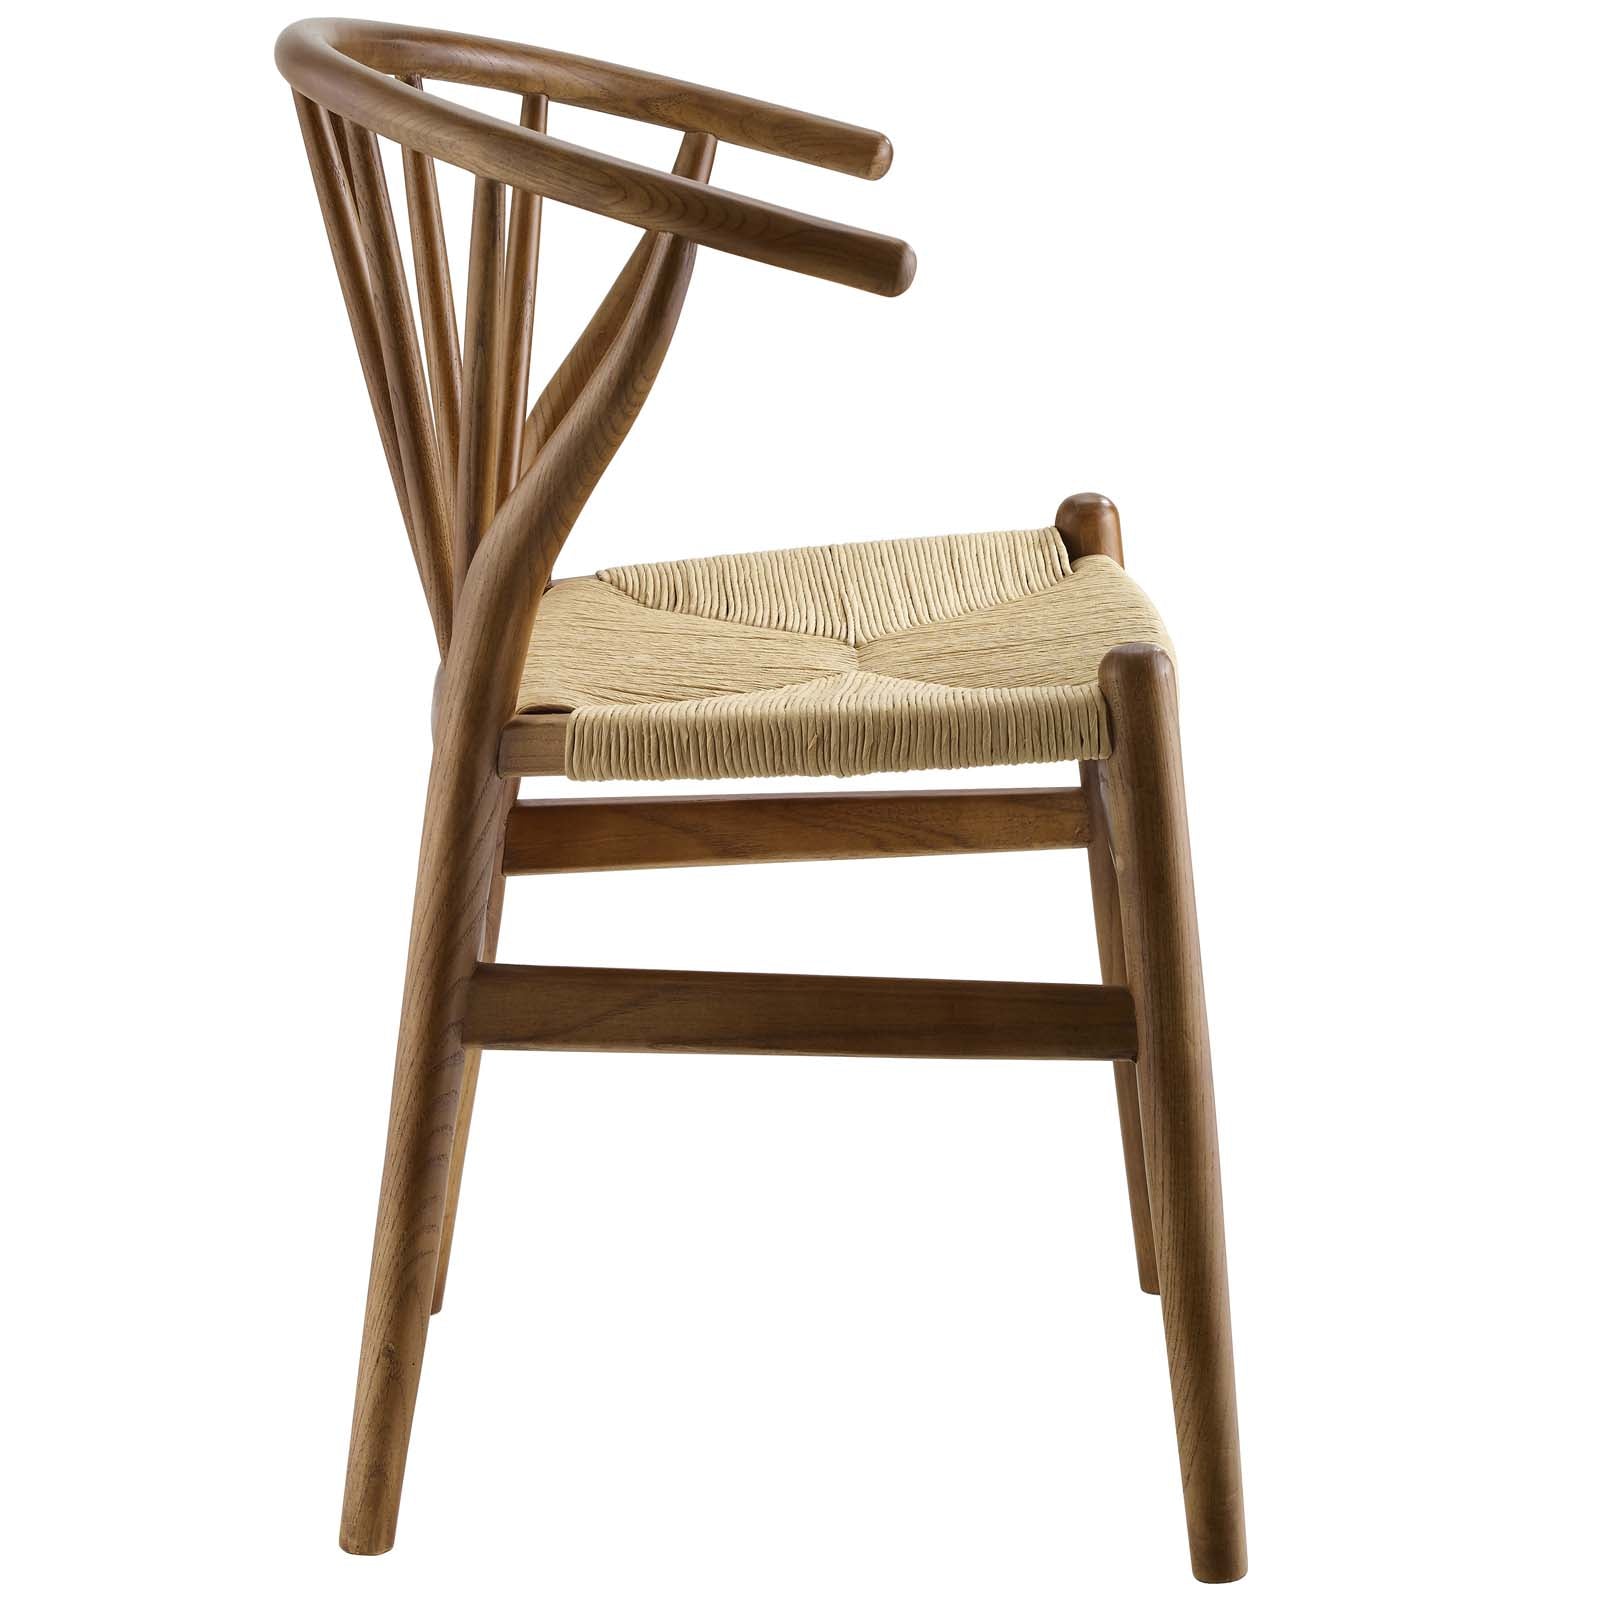 Flourish Spindle Wood Dining Side Chair - East Shore Modern Home Furnishings